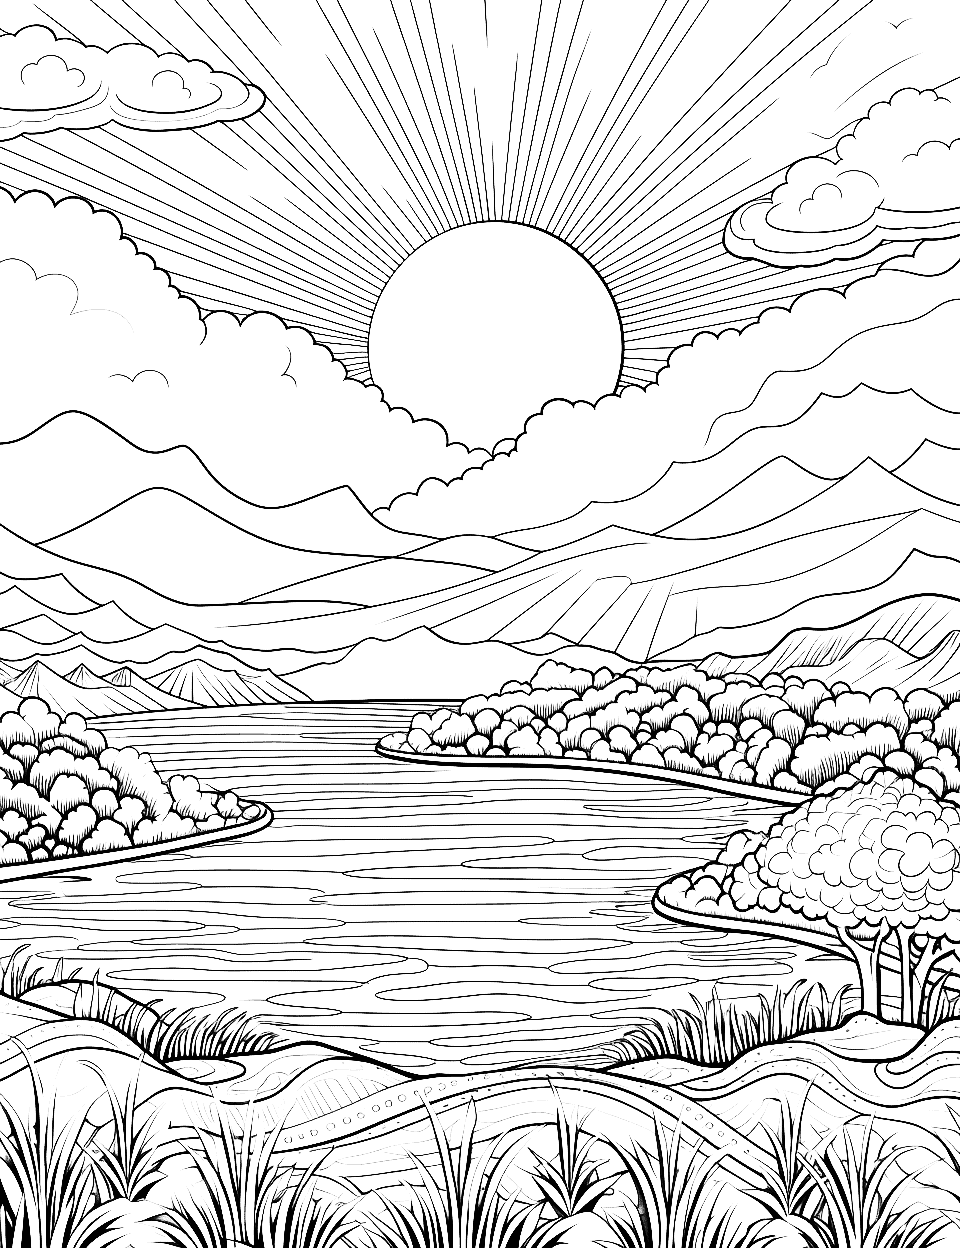 Inspiring Sunrise Adult Coloring Page - The first light of dawn breaking over a peaceful landscape.